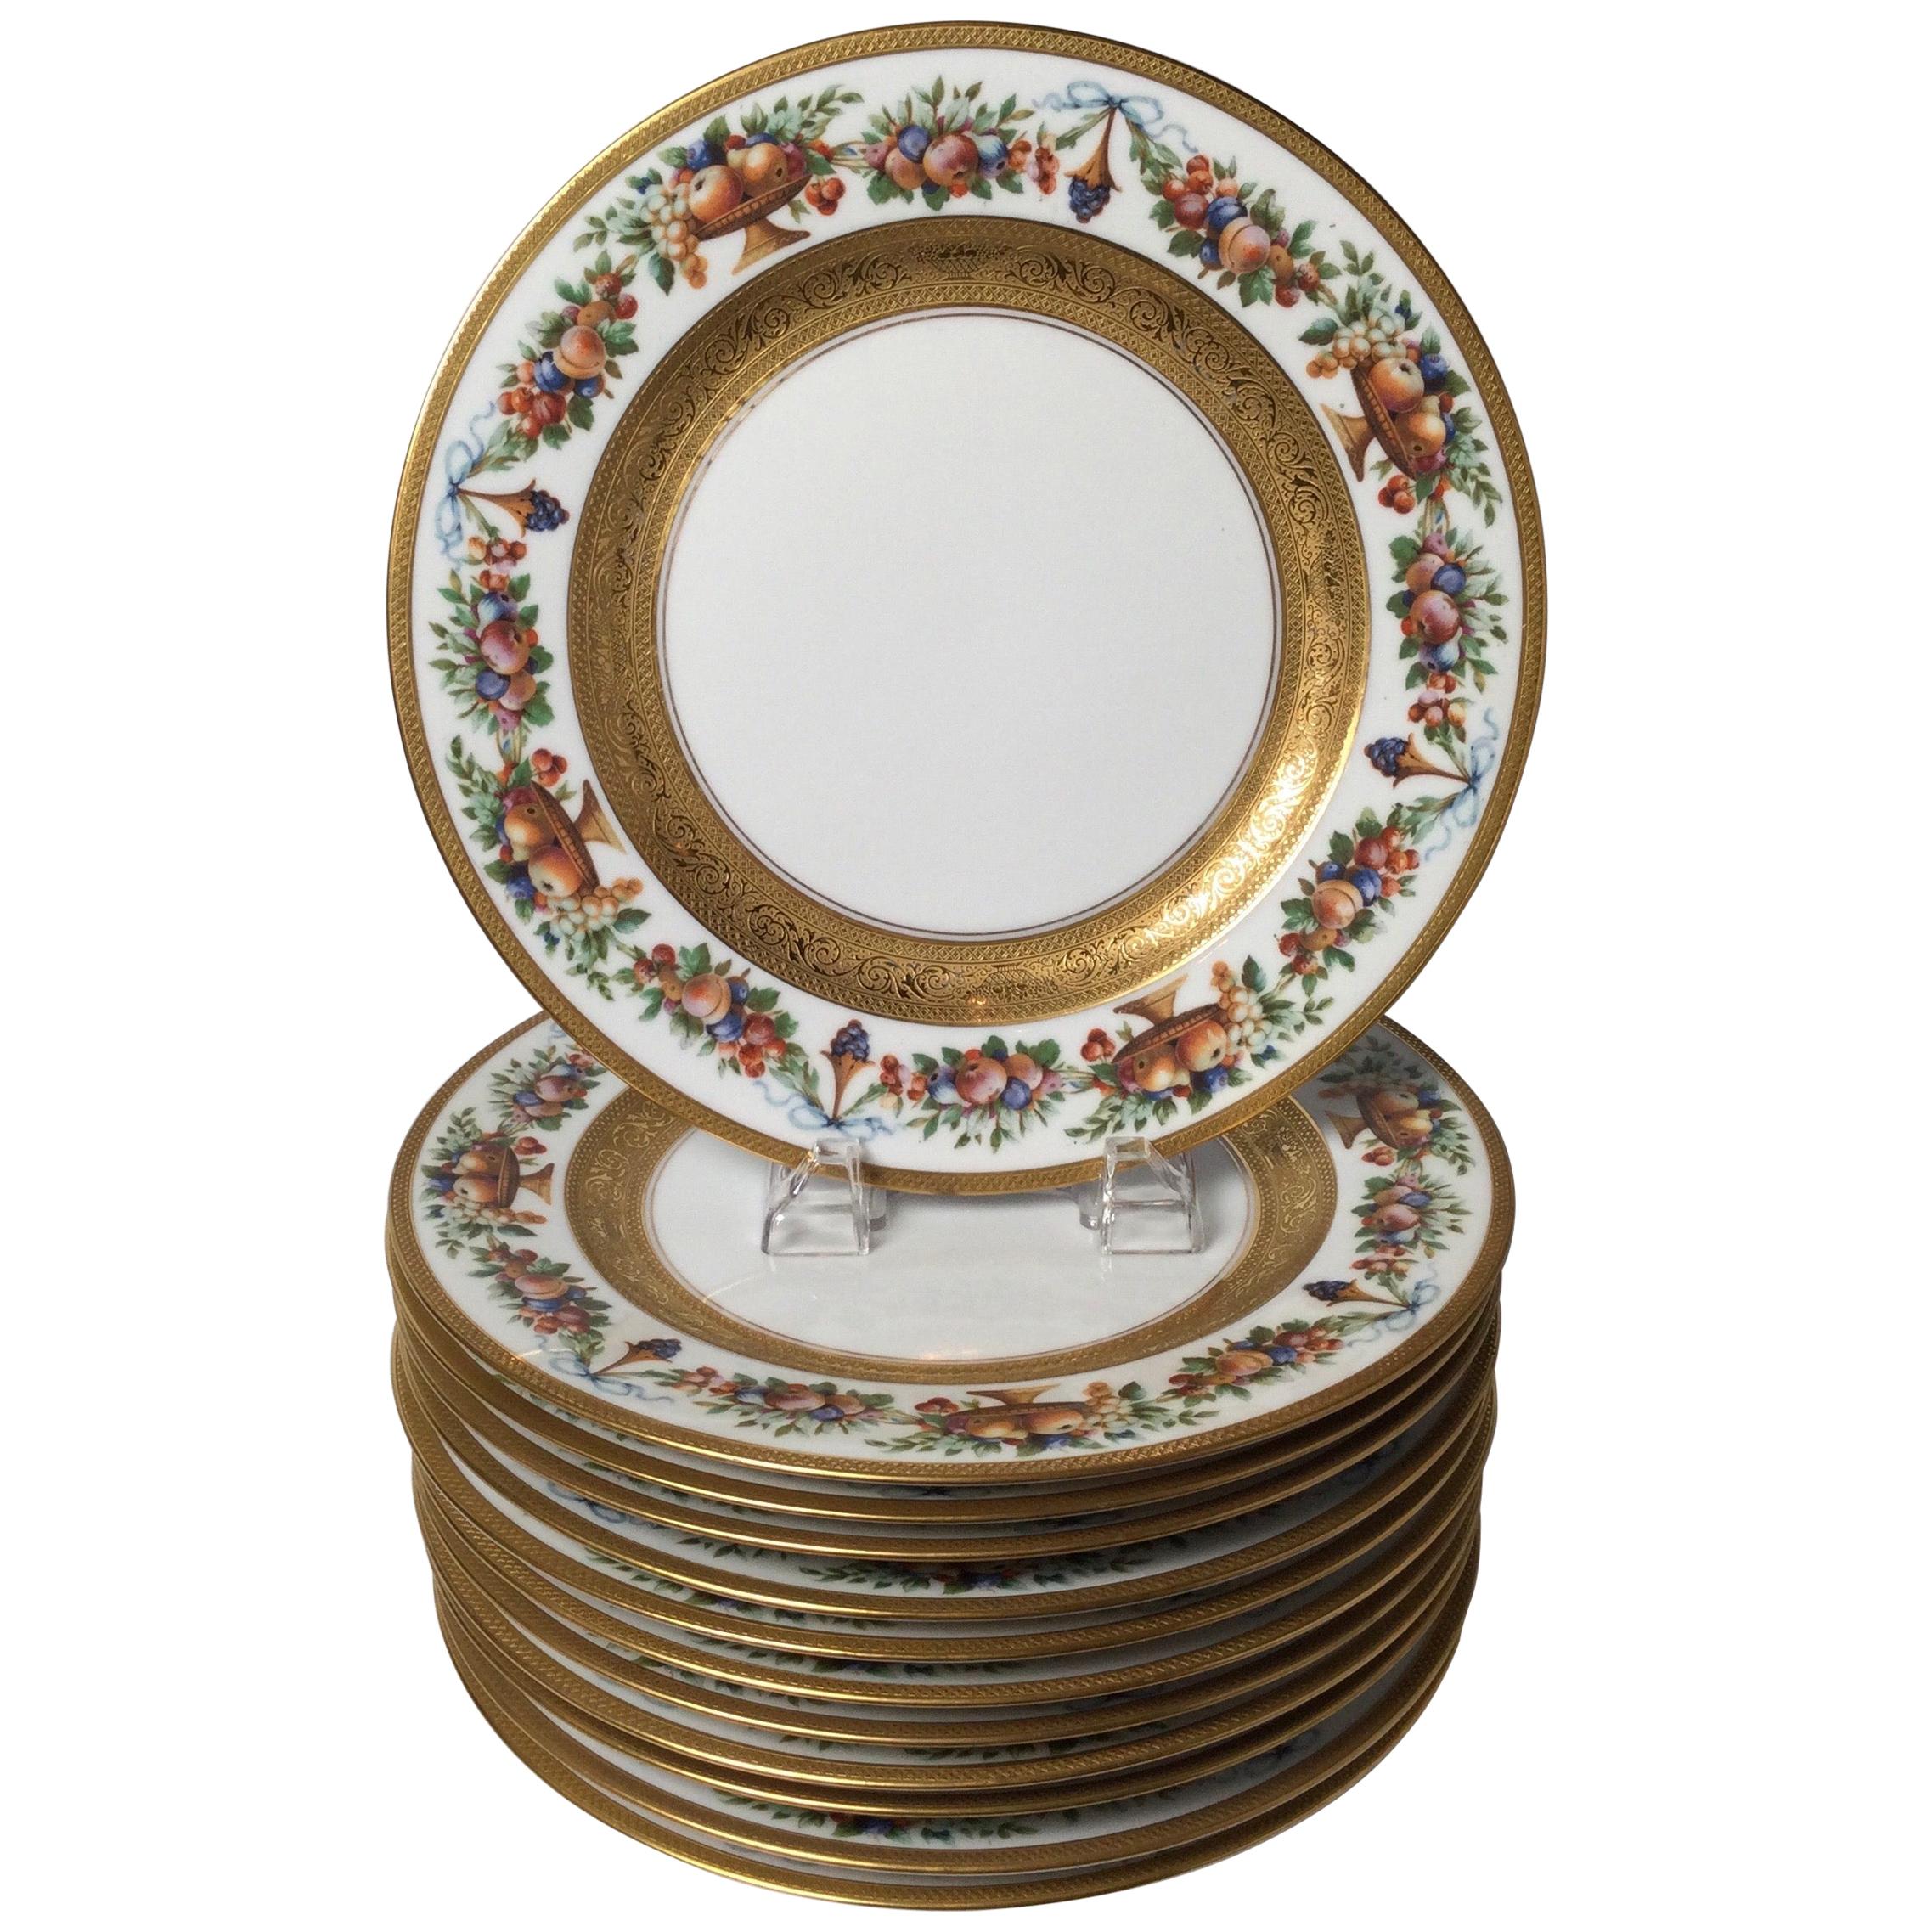 Set of 12 Gilt Banded Service Dinner Plates with Fruit Borders